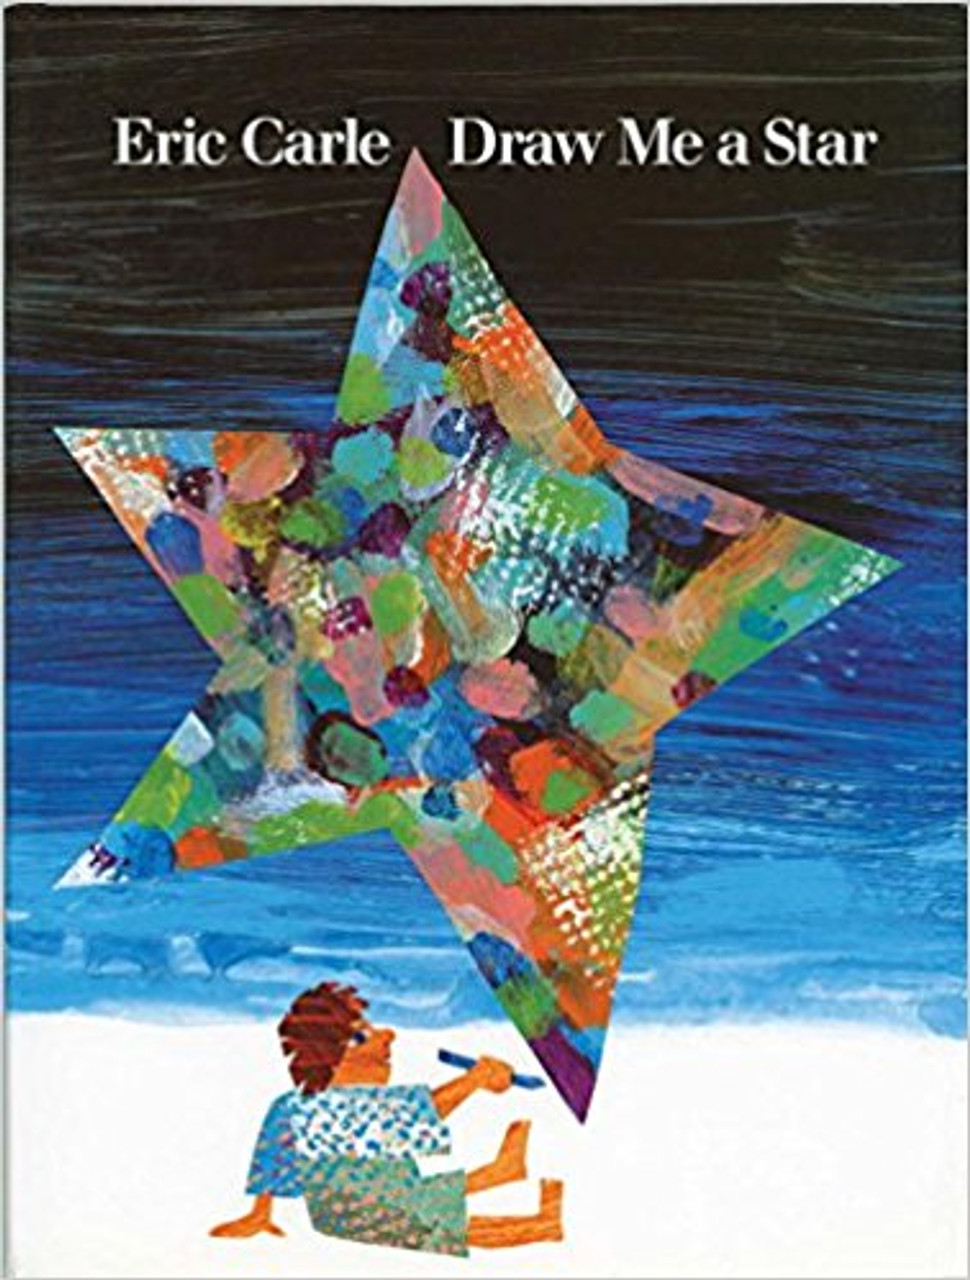 Draw Me A Star by Eric Carle